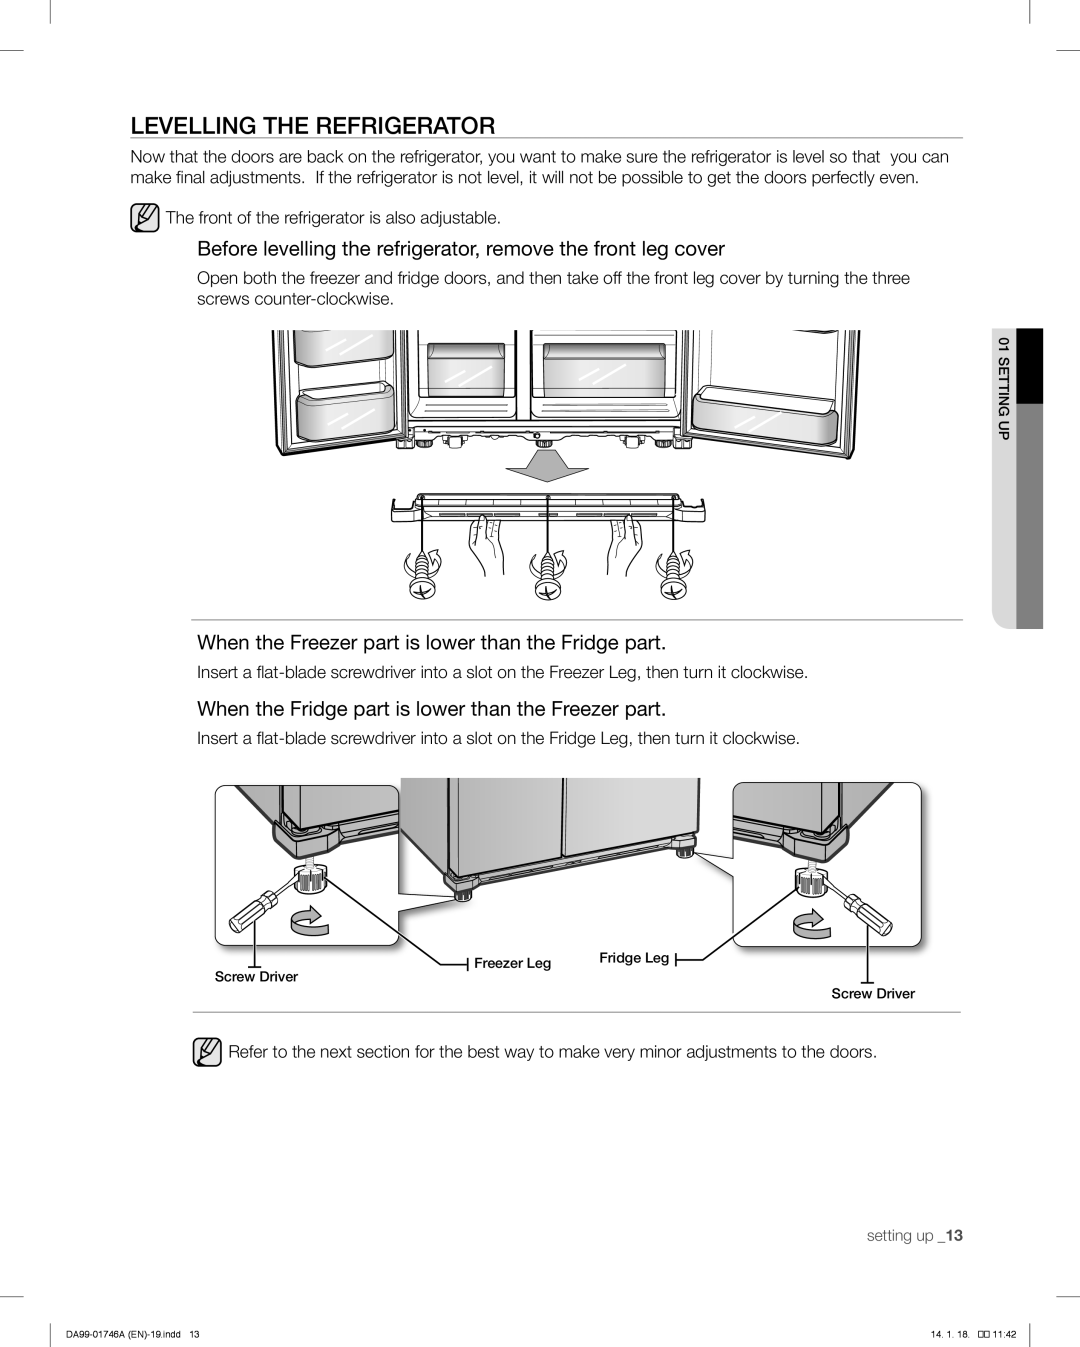 Samsung RSG257AA user manual Levelling The Refrigerator, Before levelling the refrigerator, remove the front leg cover 